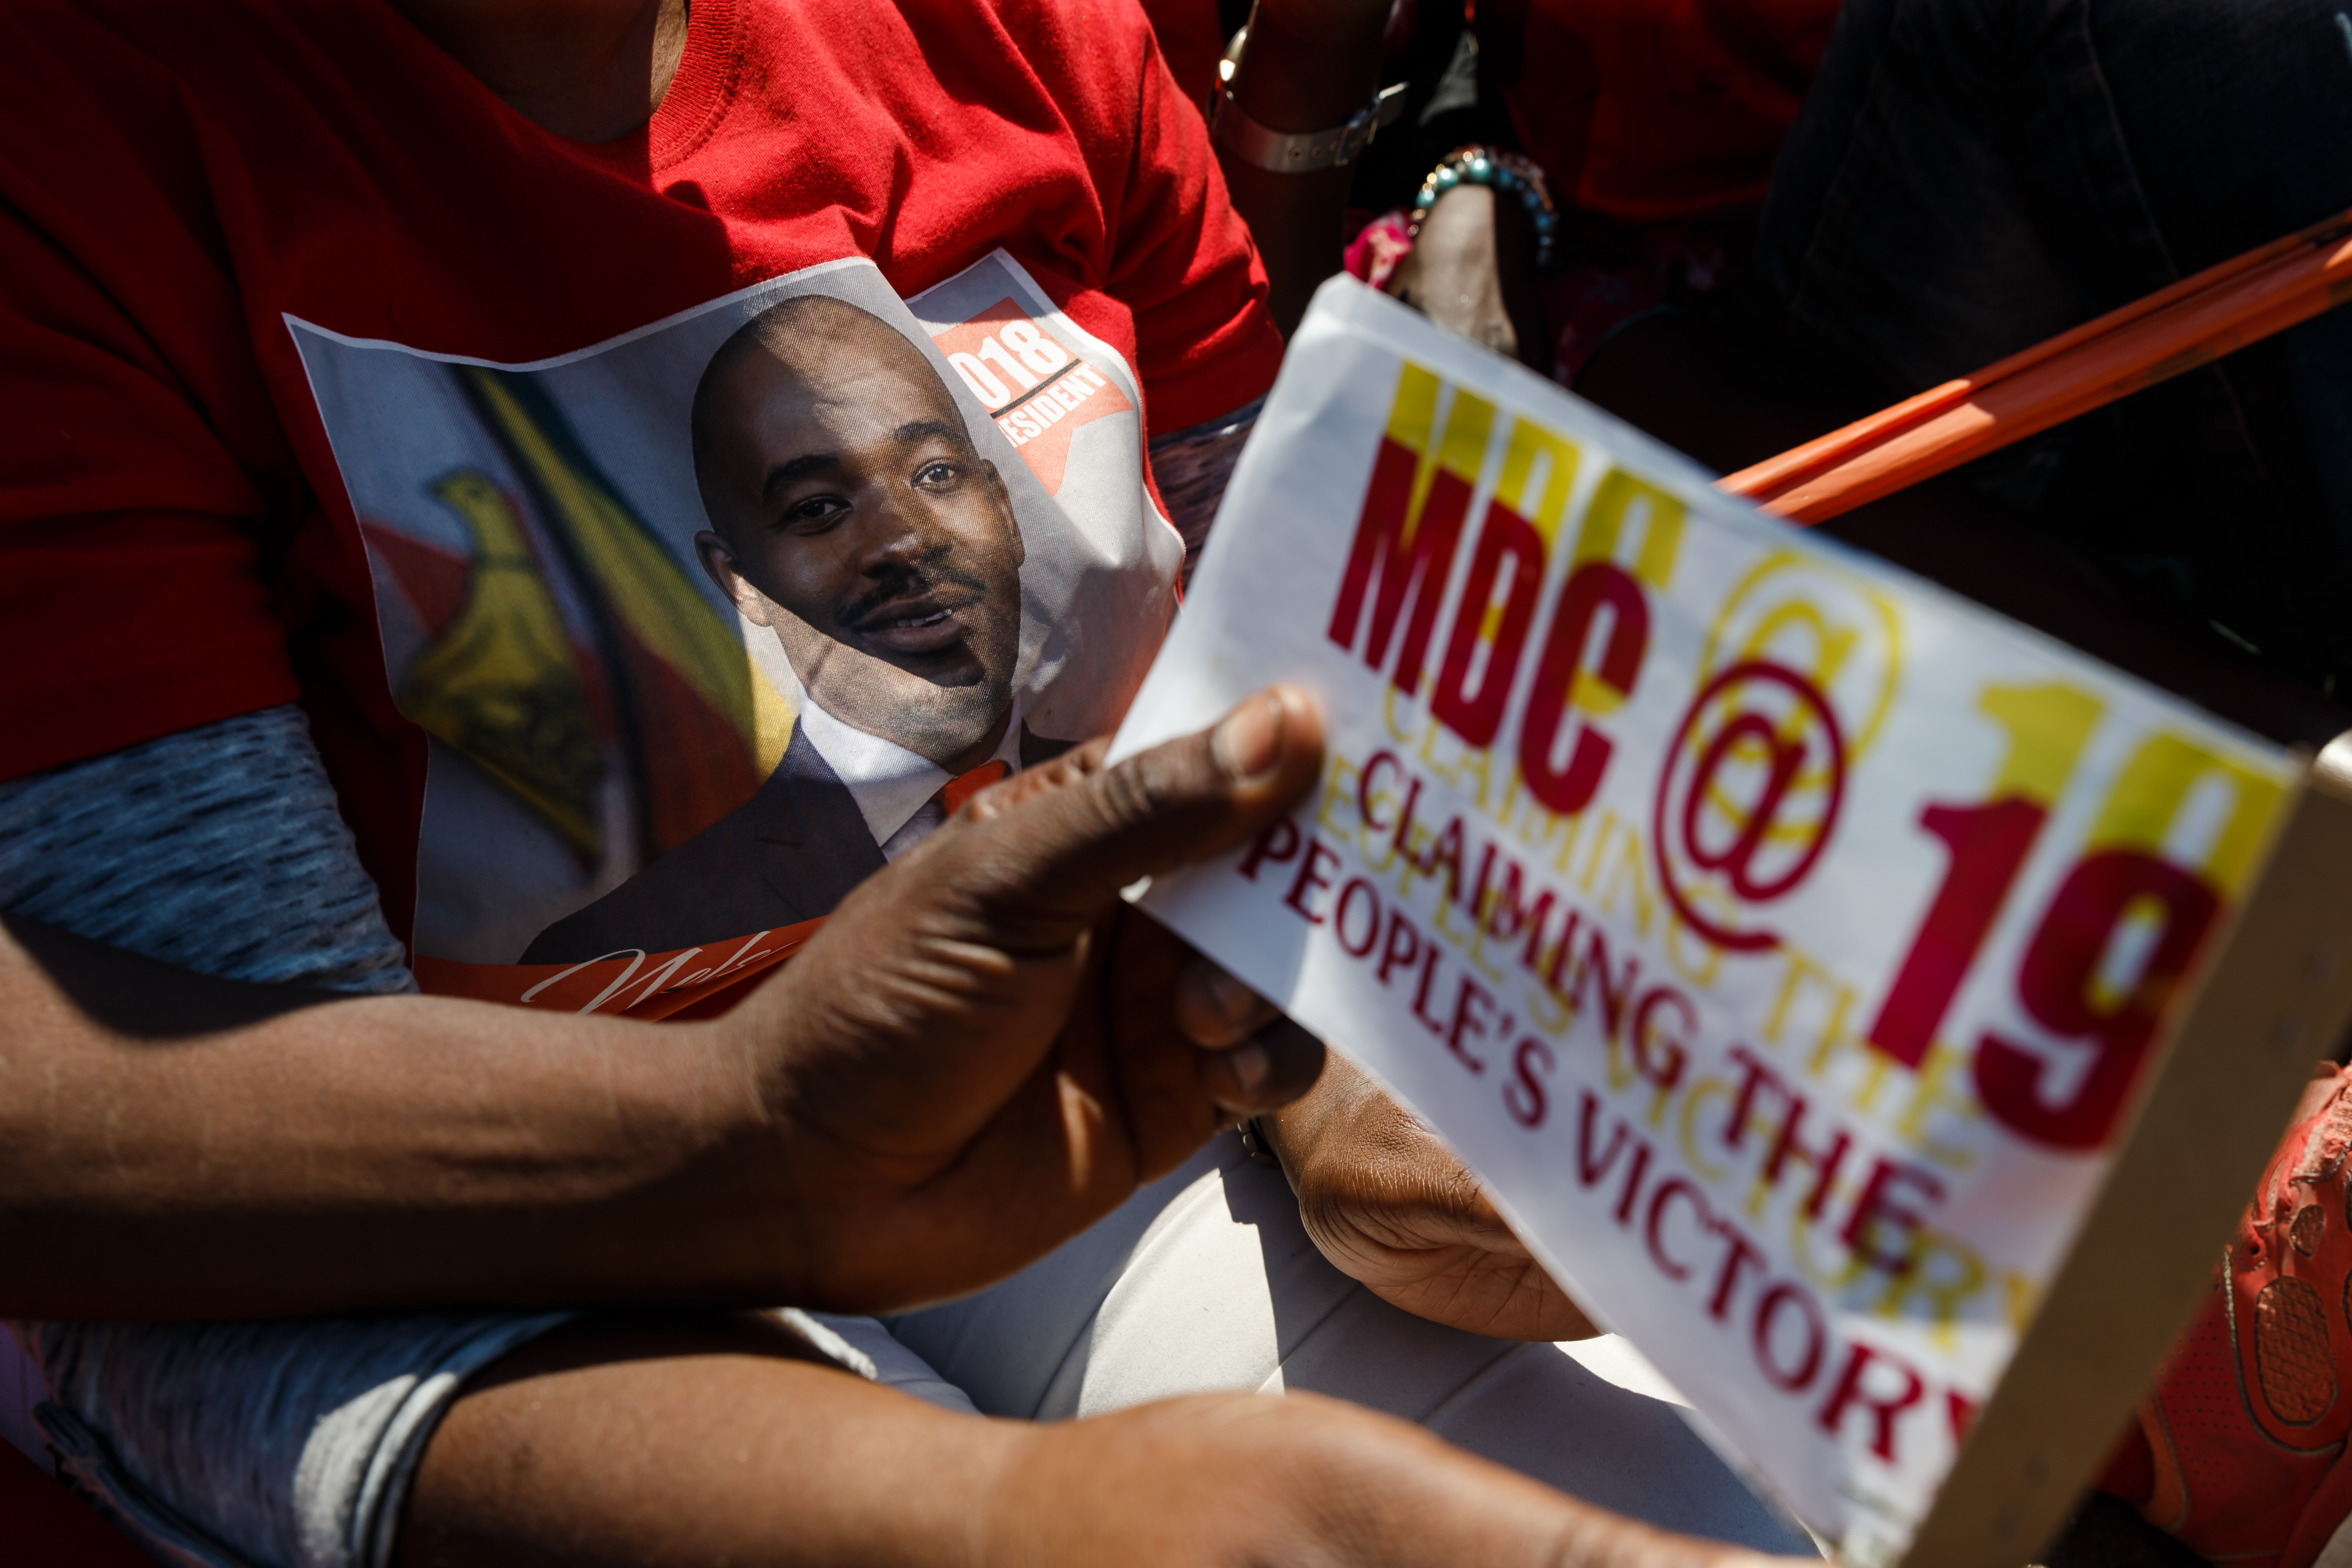 Supporters of Zimbabwe's main opposition leader Nelson Chamisa of the Movement for Democratic Change (MDC) party gather for a rally to commemorate the 19th anniversary of the MDC at Gwanzura Stadium in Harare on October 27, 2018. Chamisa claims to have won the July 30 presidential election.